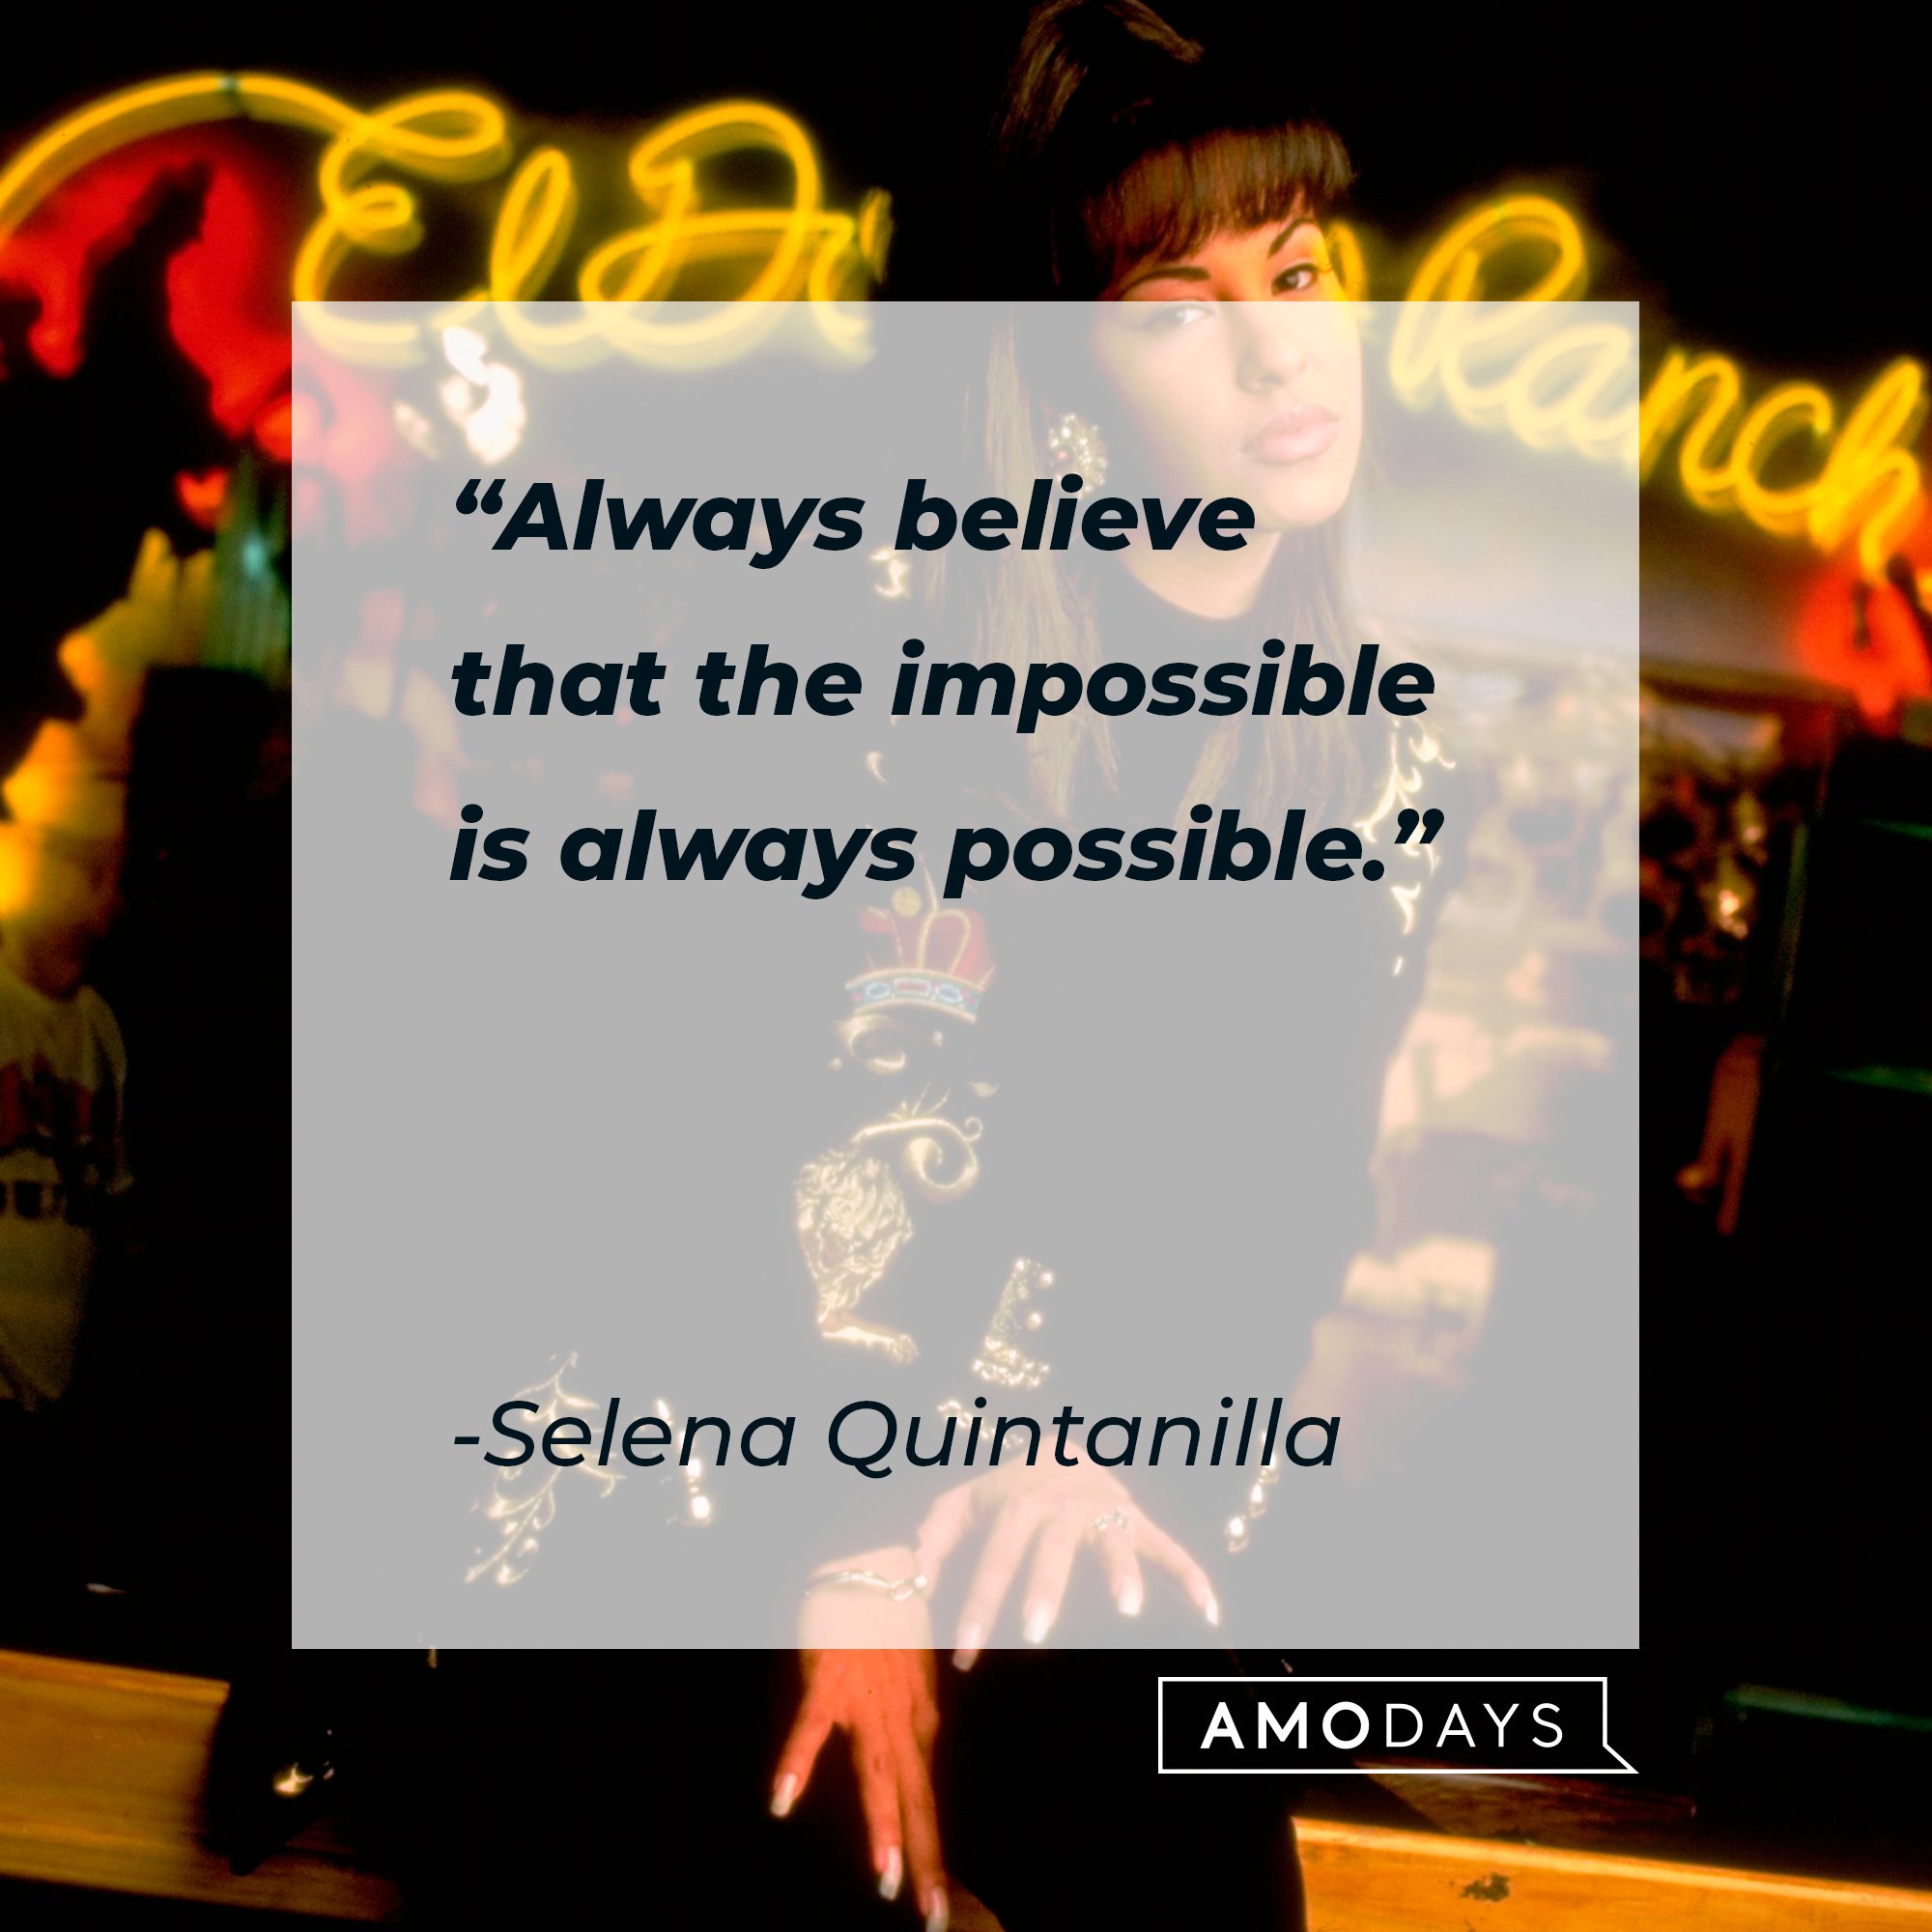 Selena Quintanilla's quote: "Always believe that the impossible is always possible." | Image: AmoDays